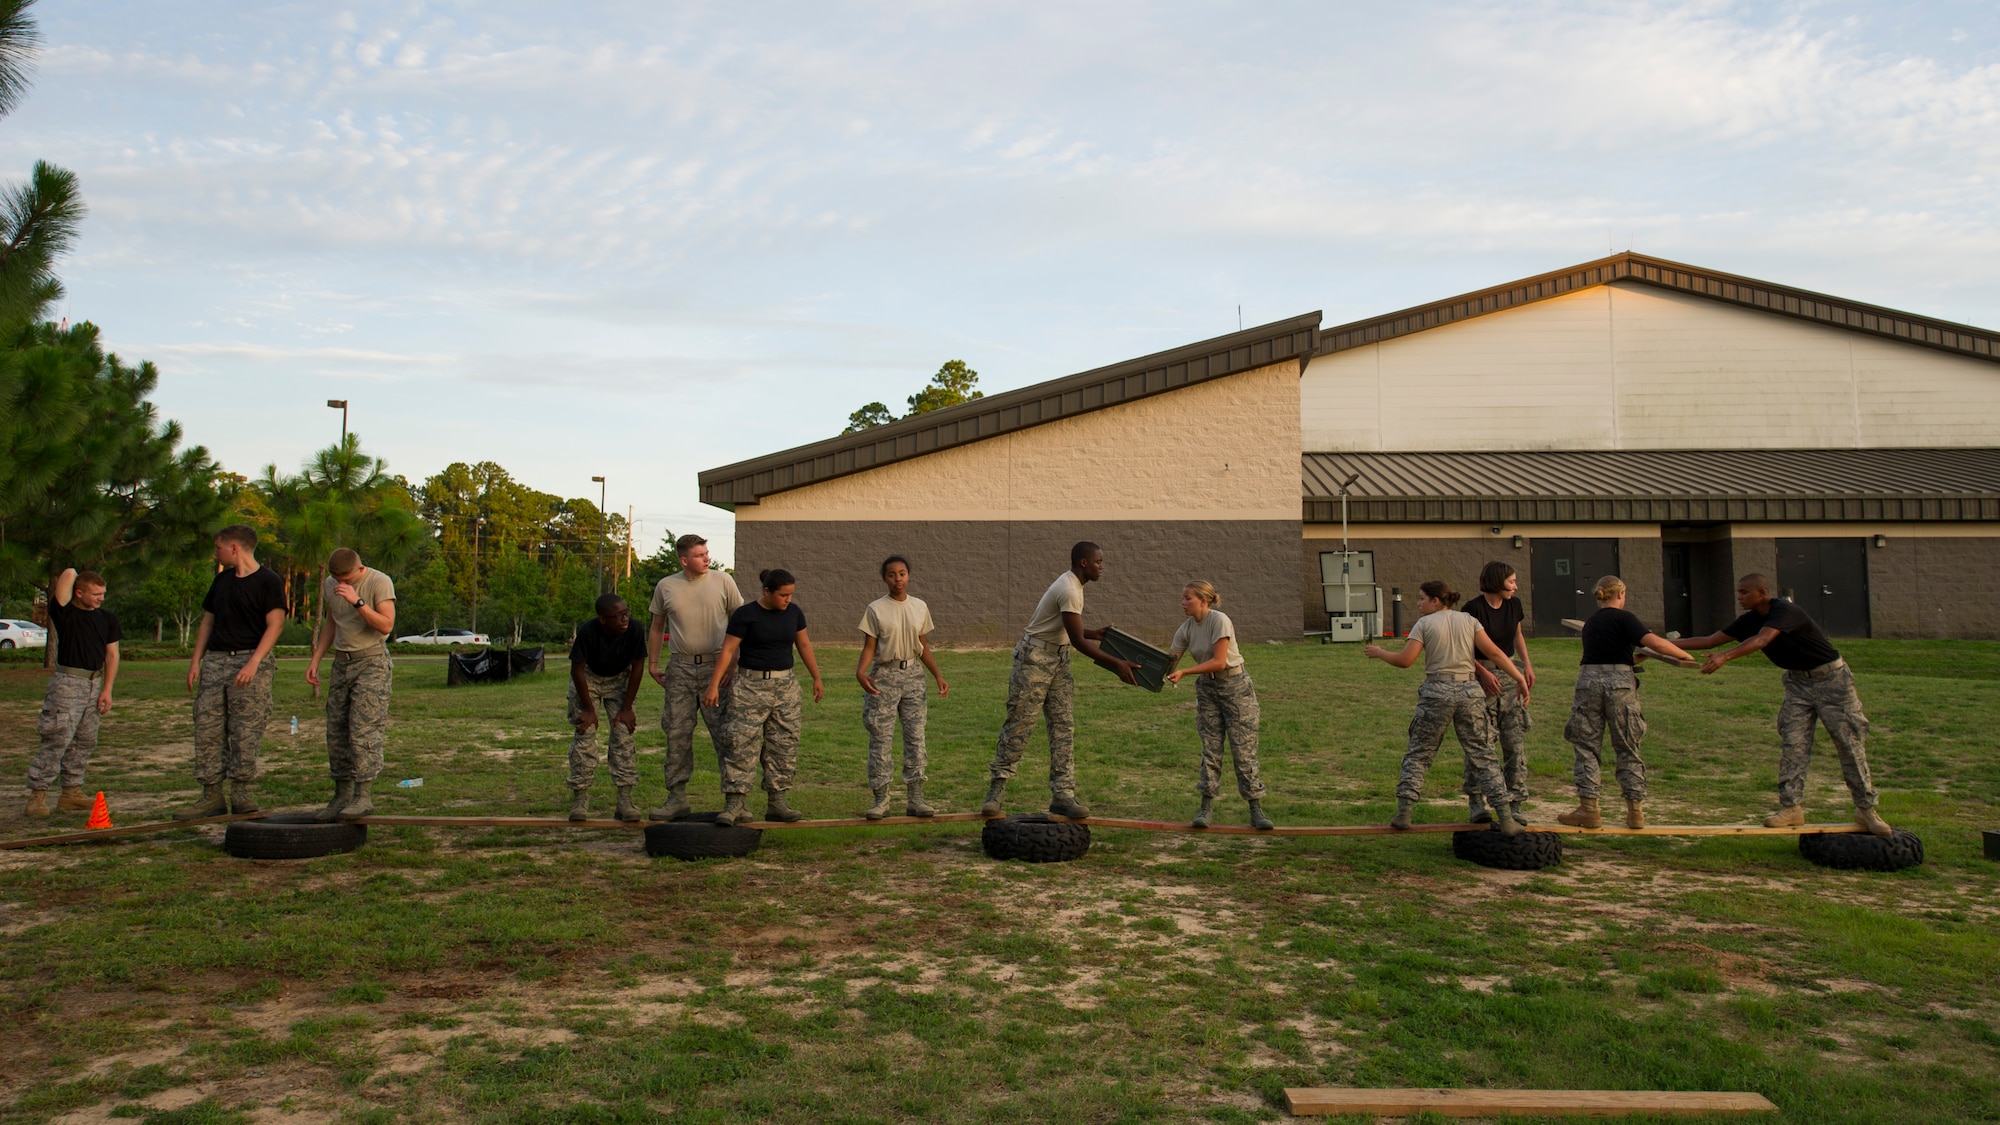 Junior ROTC cadets pass equipment across a makeshift bridge of tires and planks during a team-building exercise at Hurlburt Field, Fla., June 26, 2017. The JROTC Summer Leadership School program brought more than 50 cadets to Hurlburt Field to engage in a variety of team-building and leadership skill-developing exercises under the guidance of Air Commandos, June 26 – 30. (U.S. Air Force photo by Staff Sgt. Victor J. Caputo)